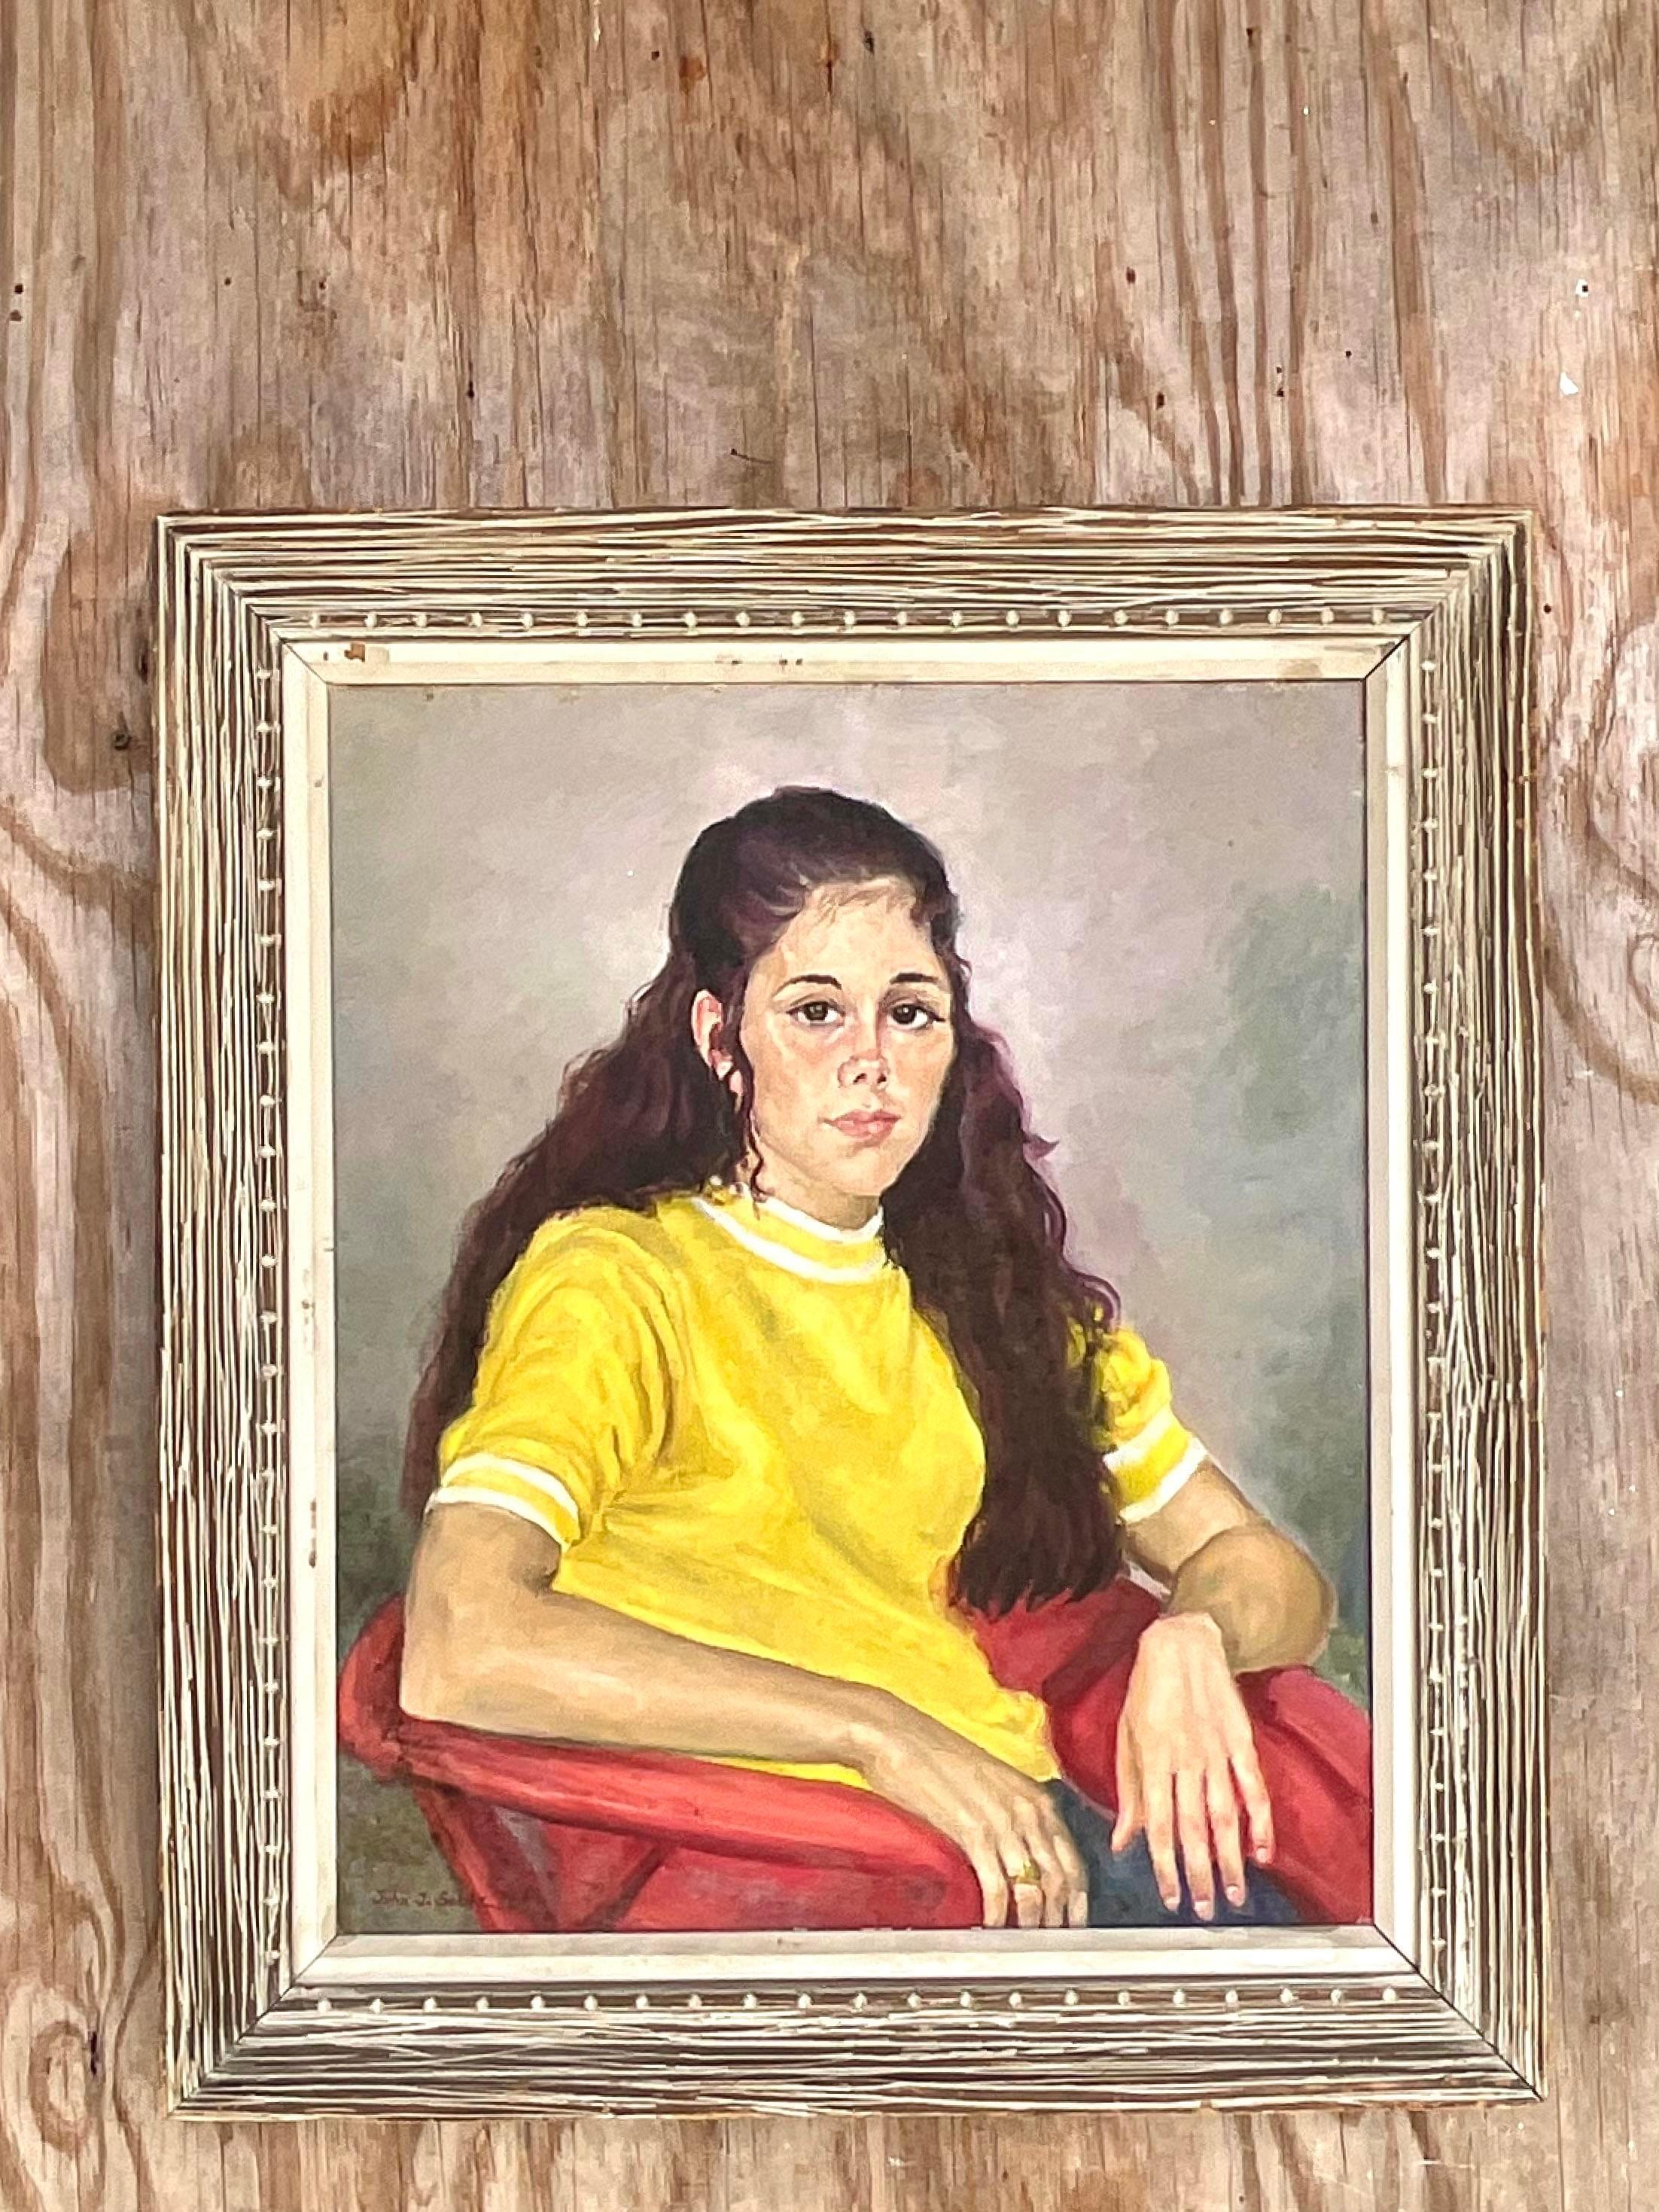 A fantastic vintage Boho original oil painting on canvas. A chic portrait of a young woman in a yellow ringer tee. Signed and dated by the artist 1964. Acquired from a Palm Beach estate.